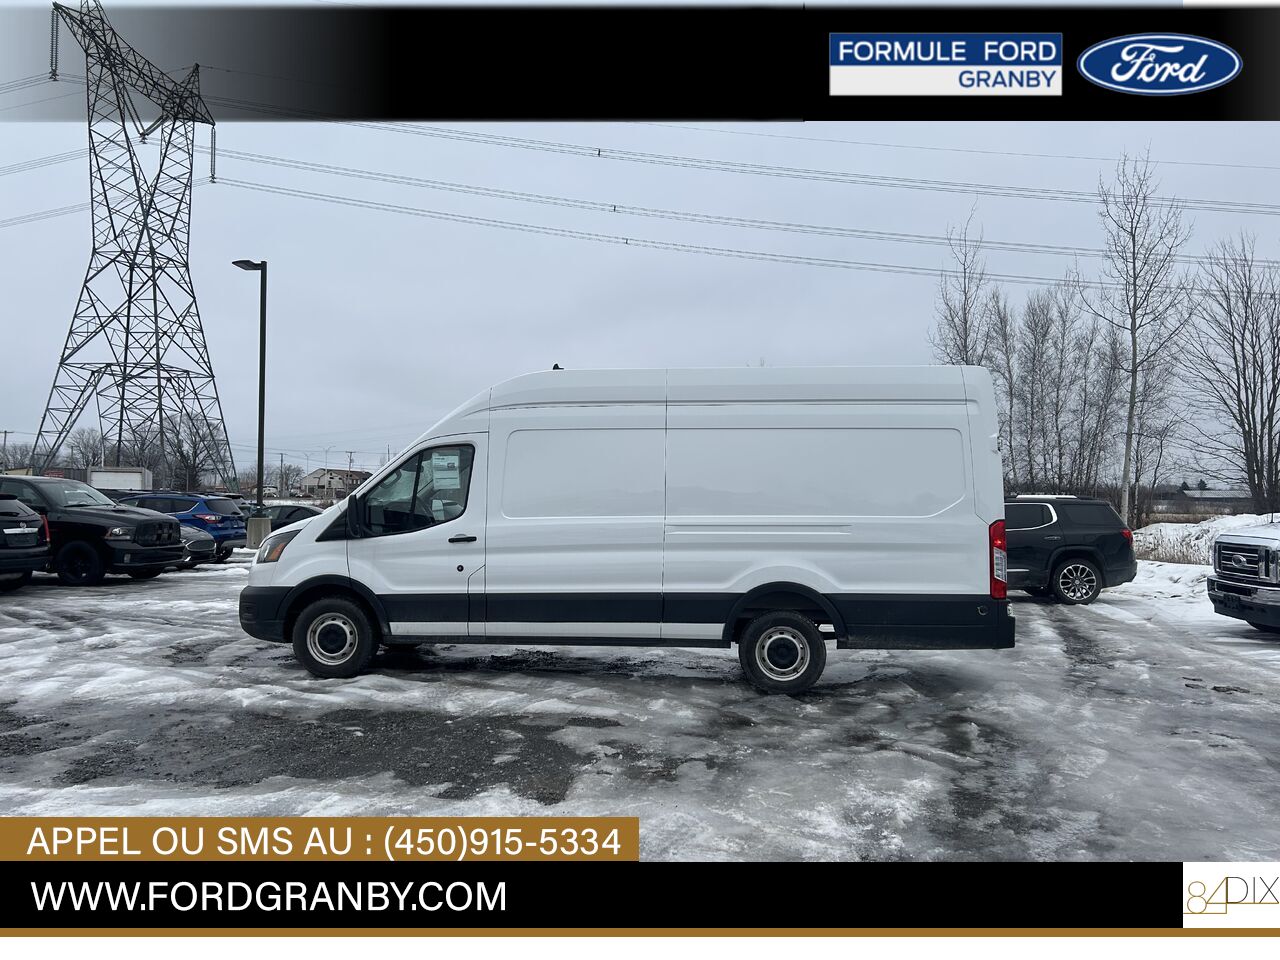 2020 Ford Transit fourgon utilitaire Granby - photo #5